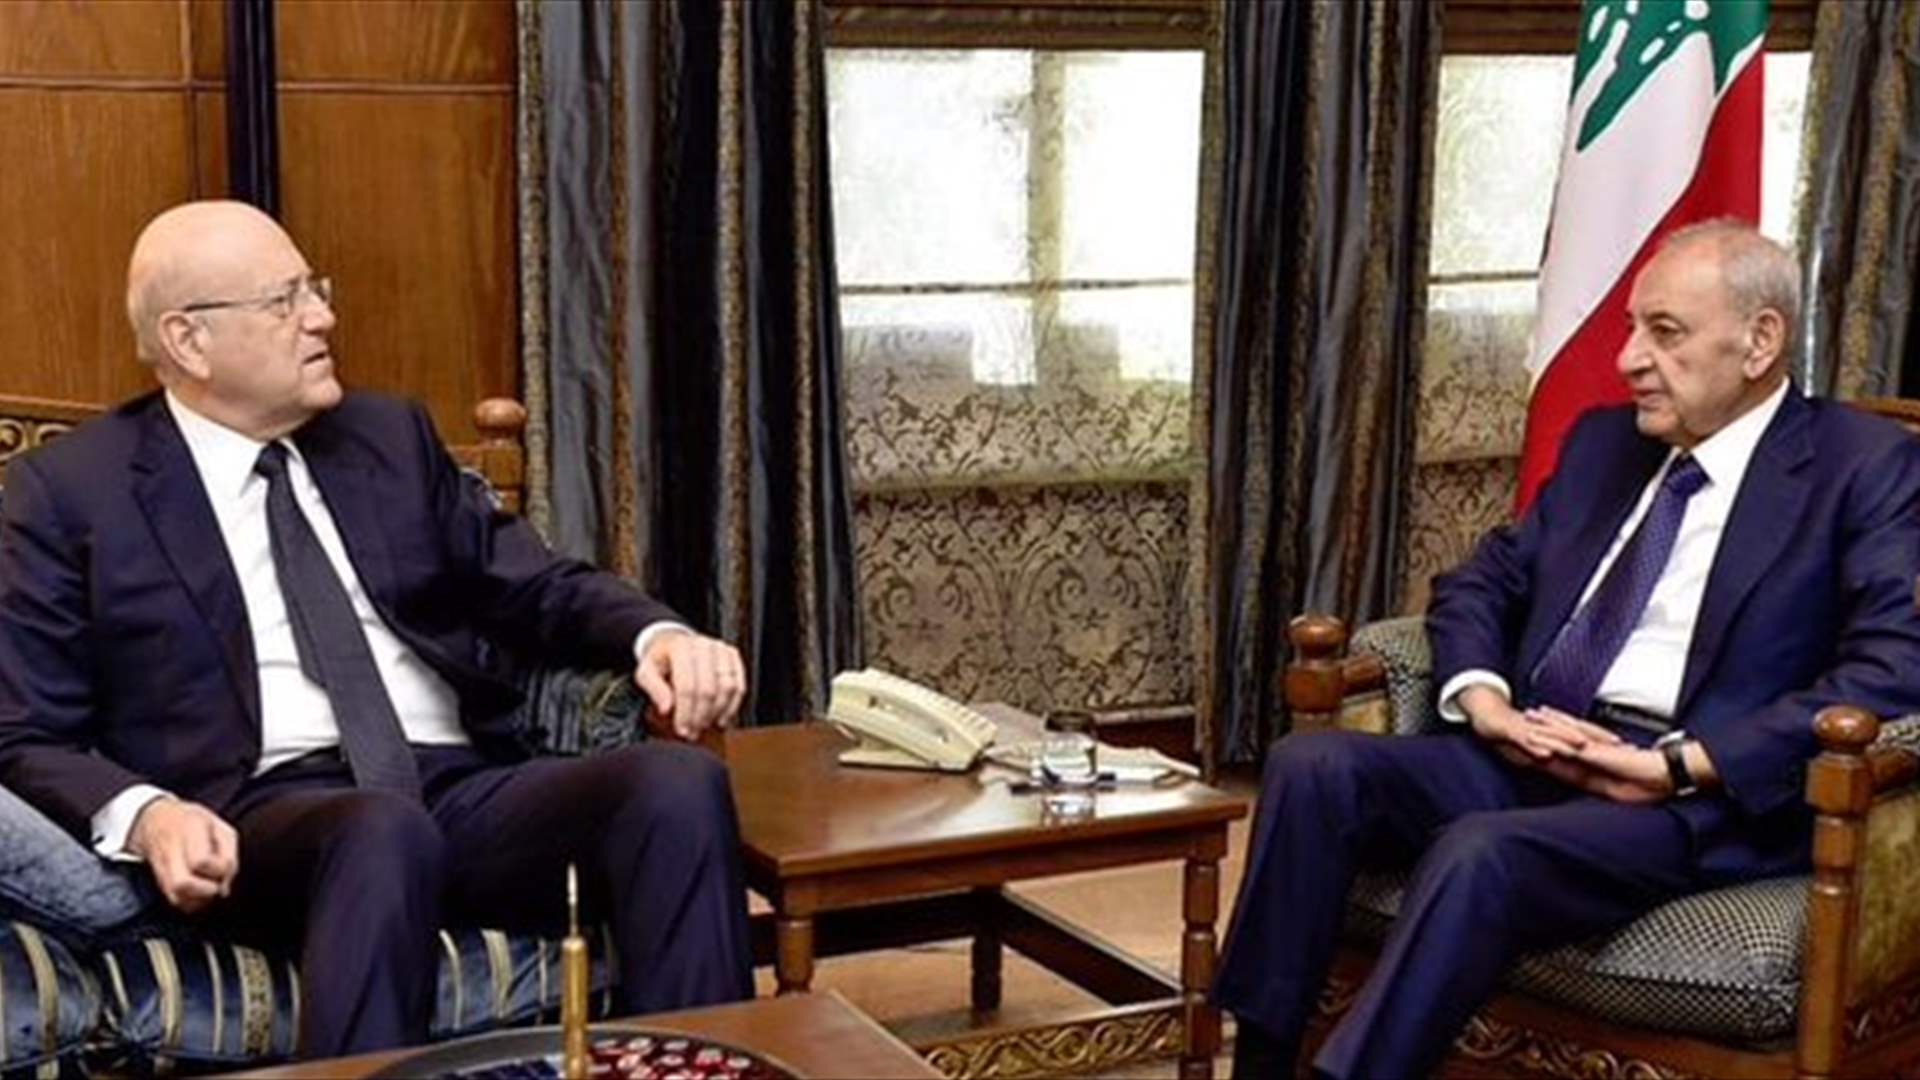 Berri and Mikati: Military institution issue should be approached calmly and wisely